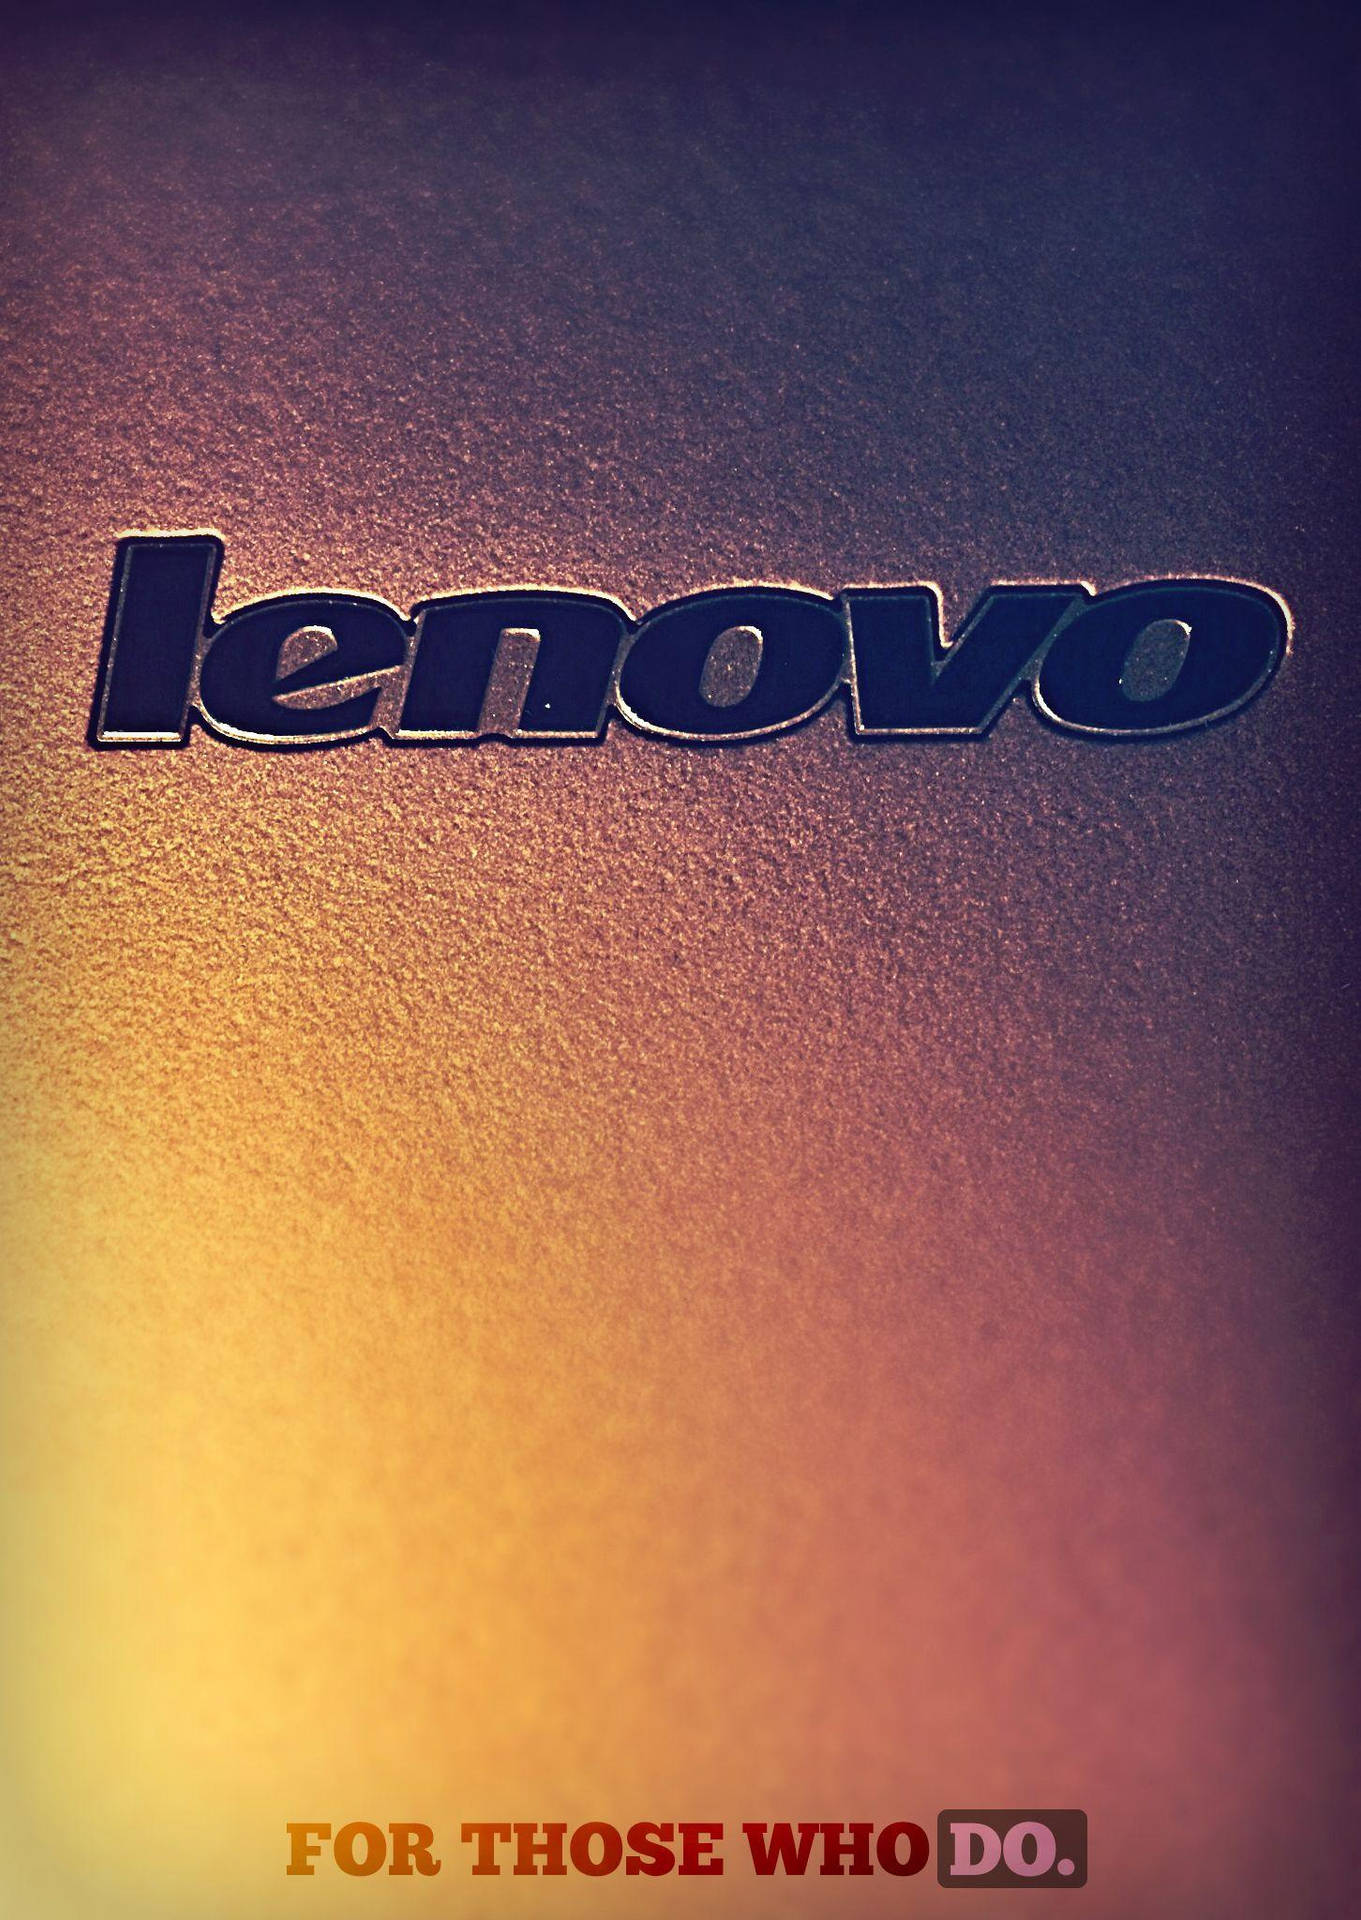 Lenovo ThinkPad Wallpaper HD HiTech 4K Wallpapers Images and Background   Wallpapers Den